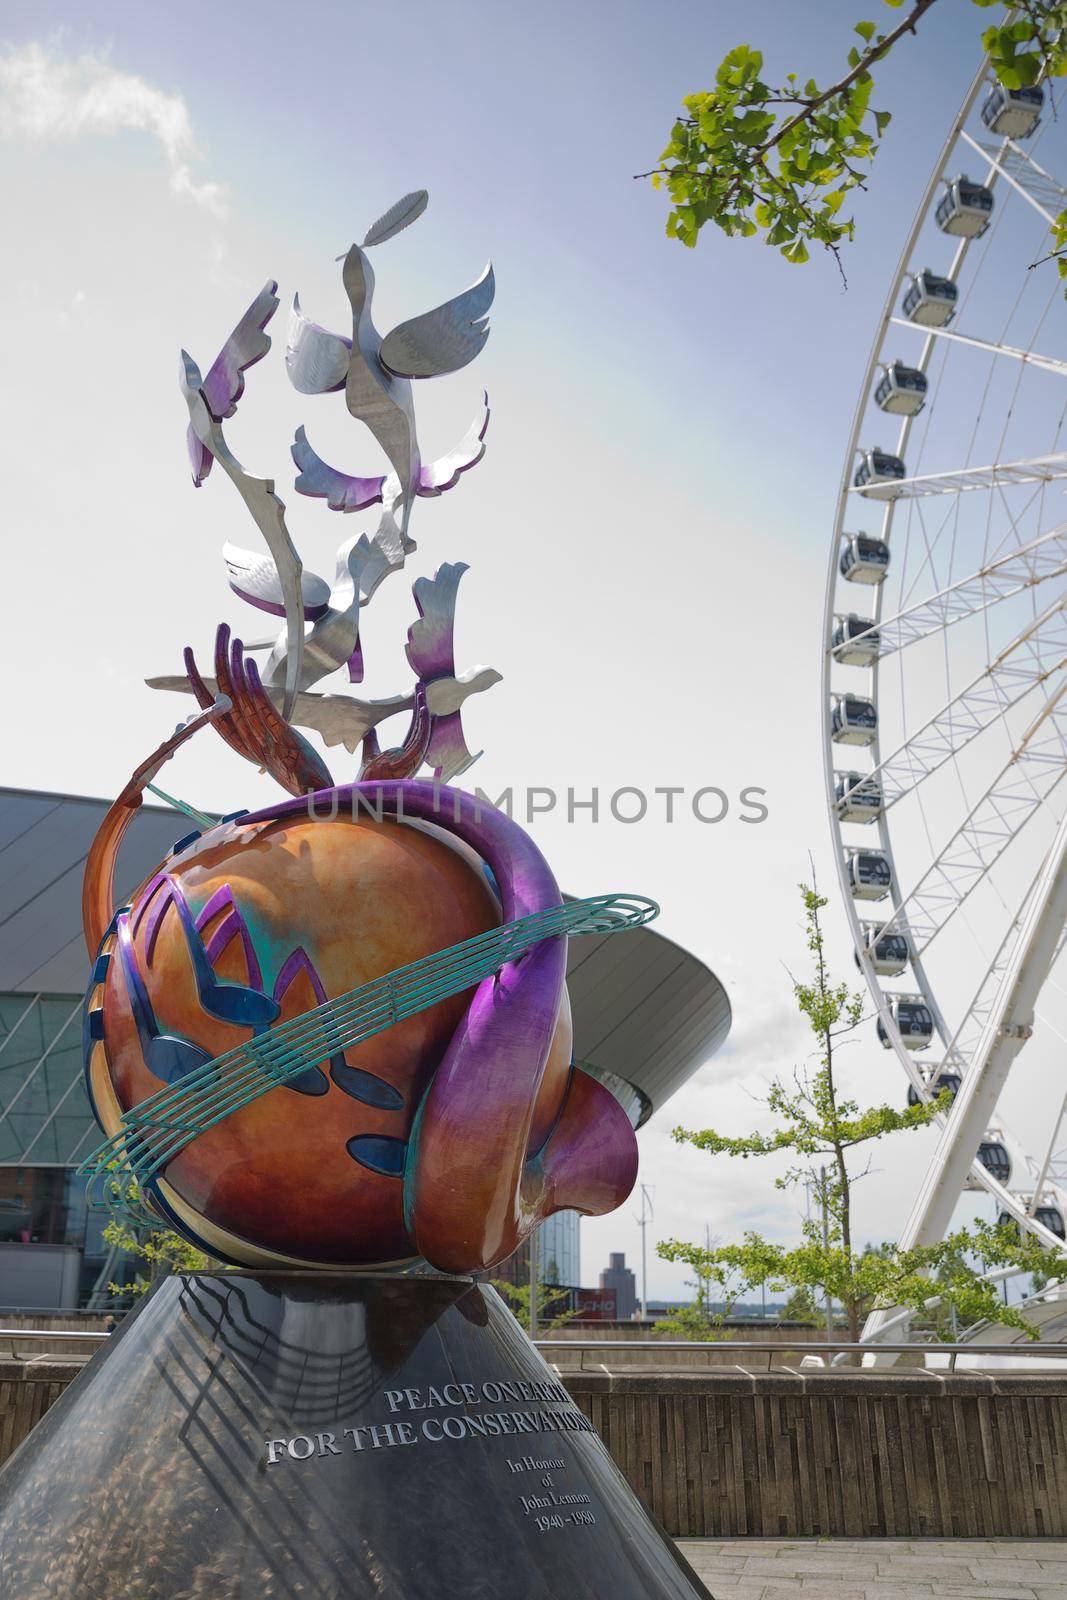 LIVERPOOL, ENGLAND, UK - JUNE 07, 2017: Peace on earth sculpture in honour of John Lennon with the Echo wheel of Liverpool to the rear at Keel Wharf, Liverpool, Merseyside, England, UK